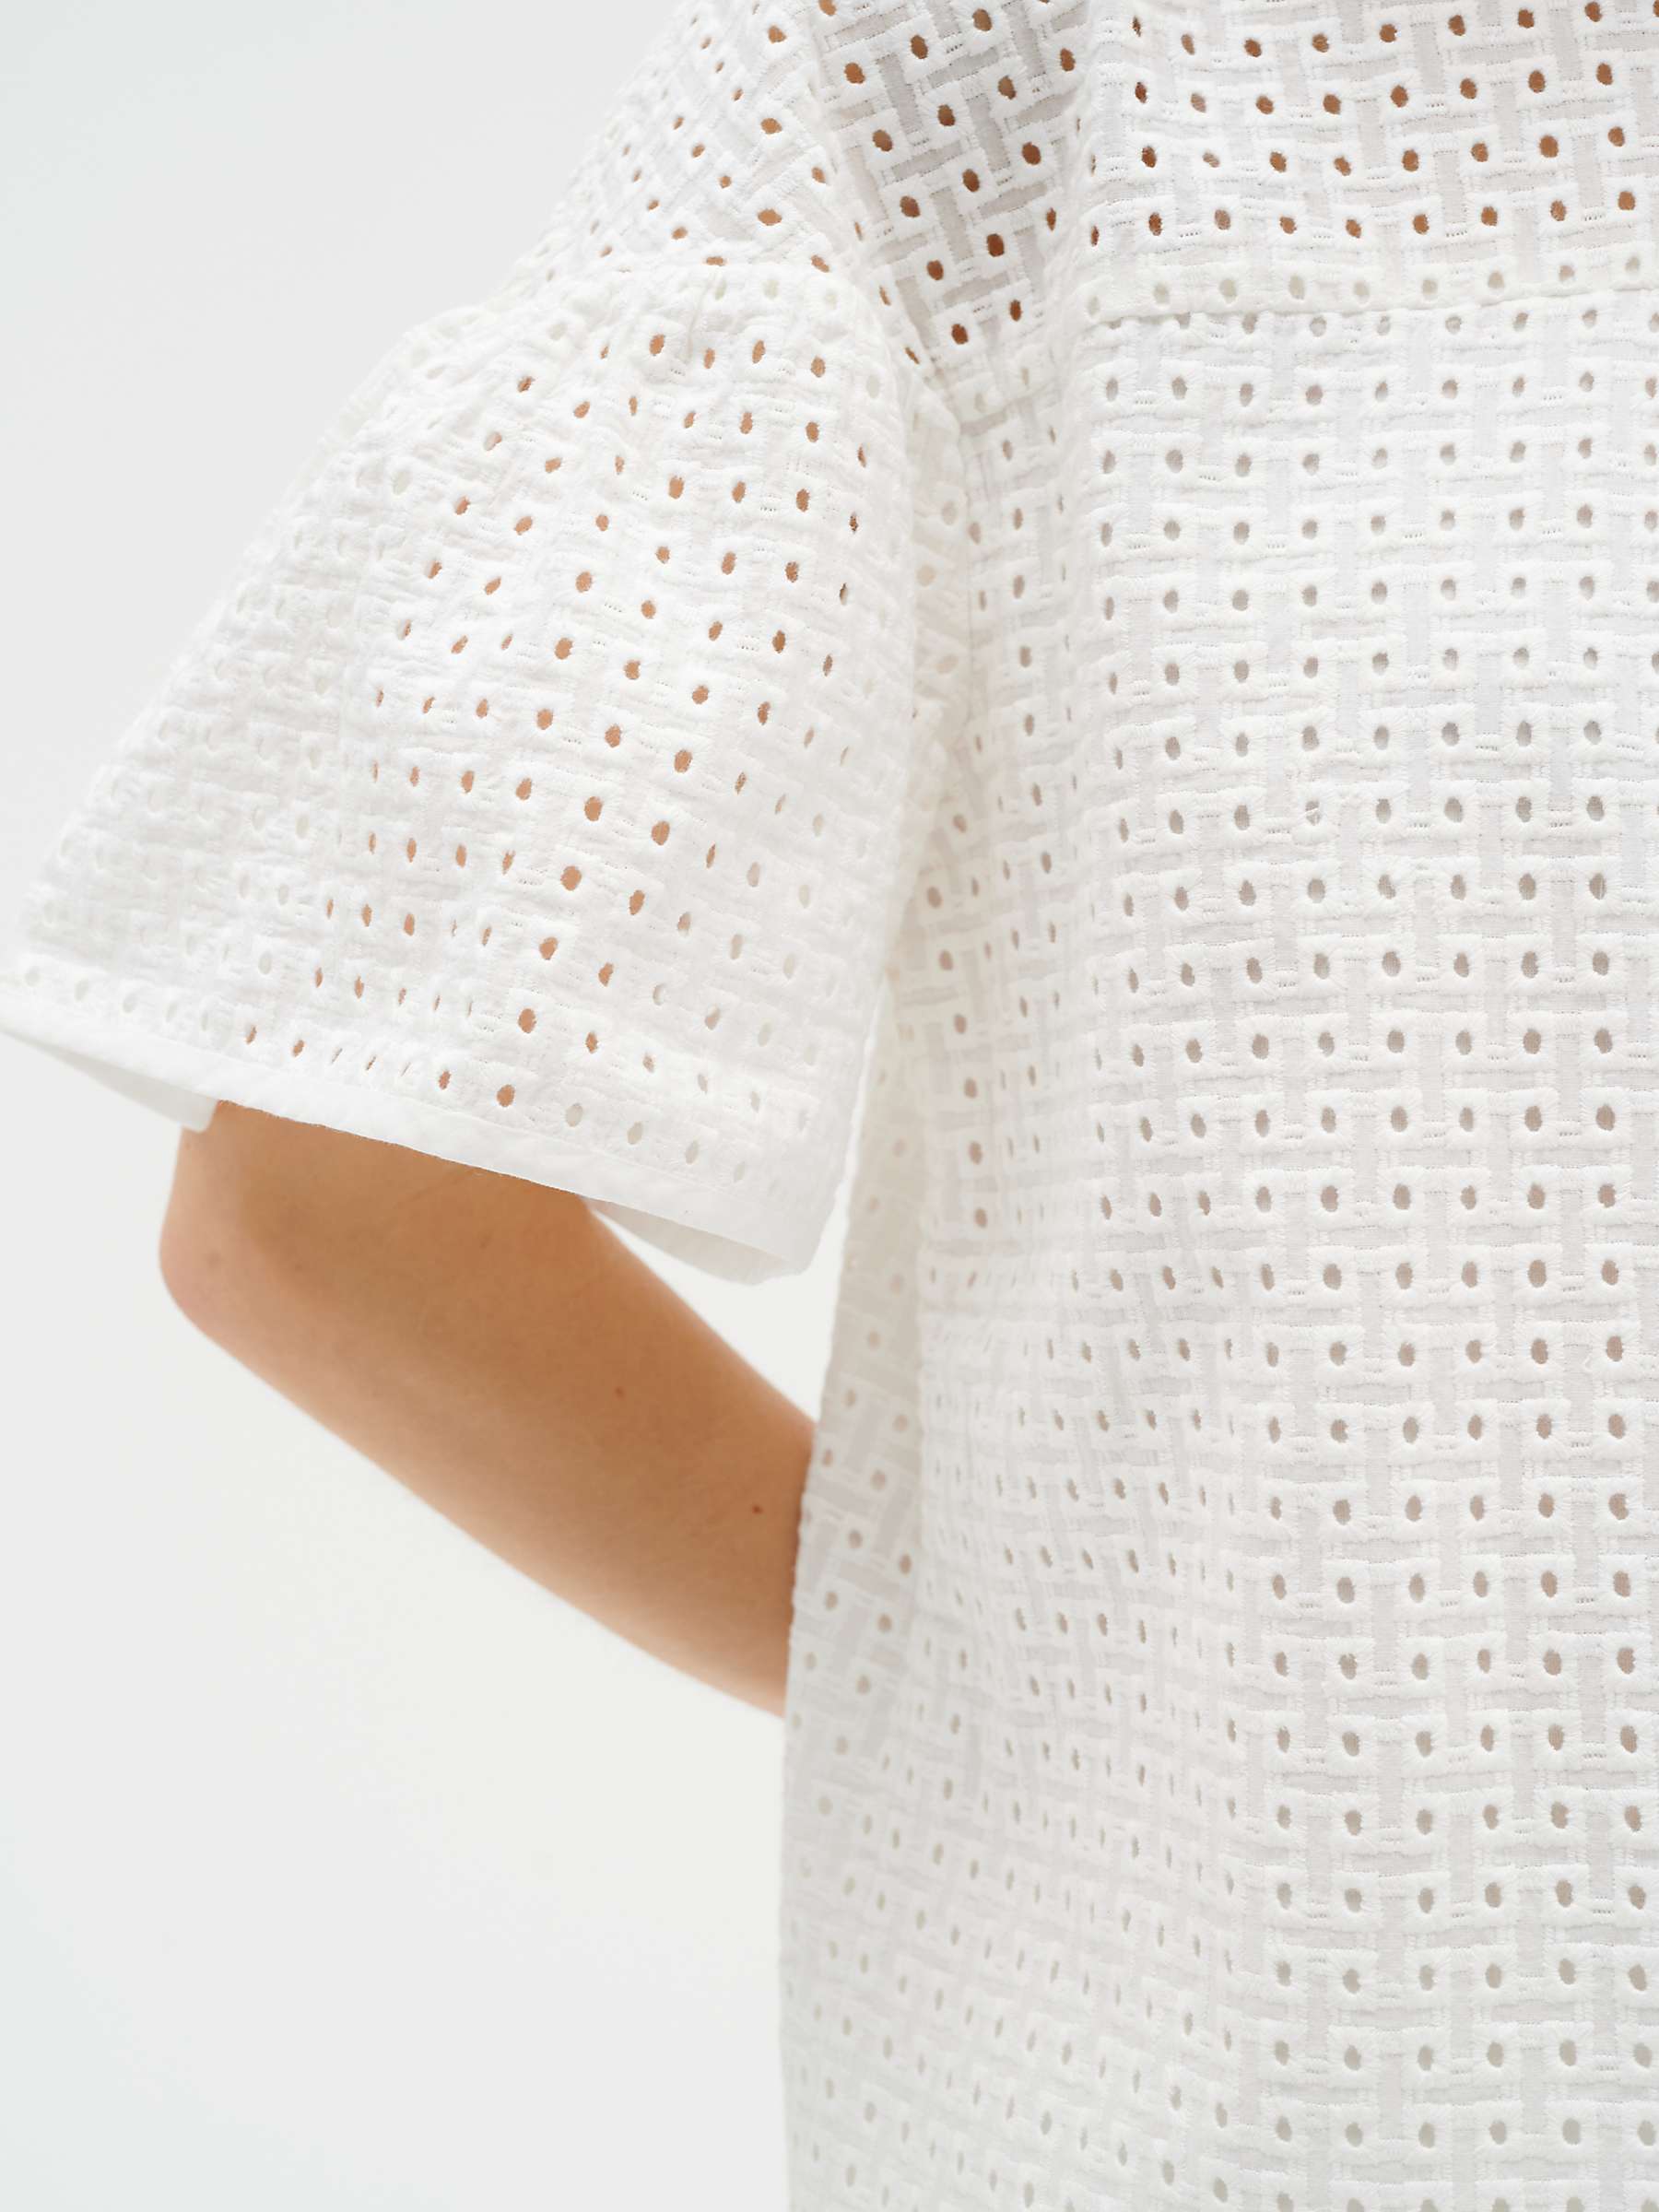 Buy InWear Eirena Broderie Anglaise Blouse, Whisper White Online at johnlewis.com